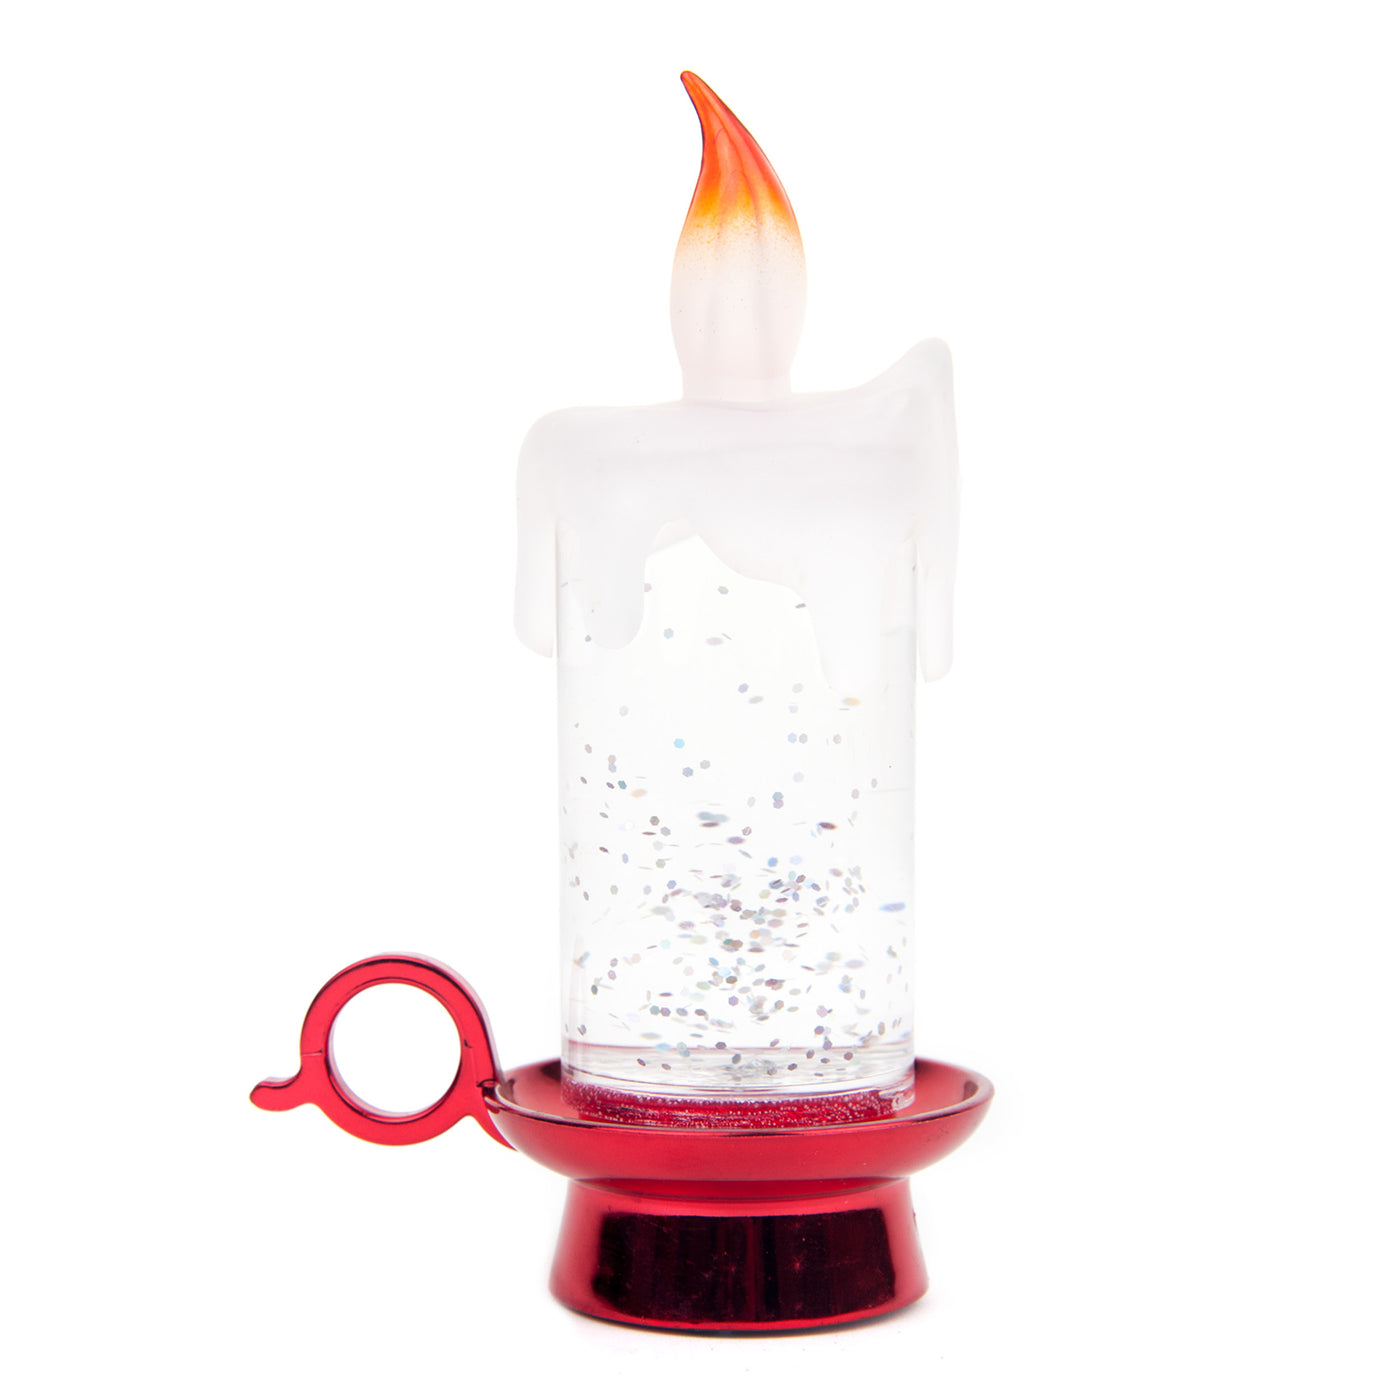 Christmas LED Candle with Red Holder, Flameless Décor, Color Changing LED